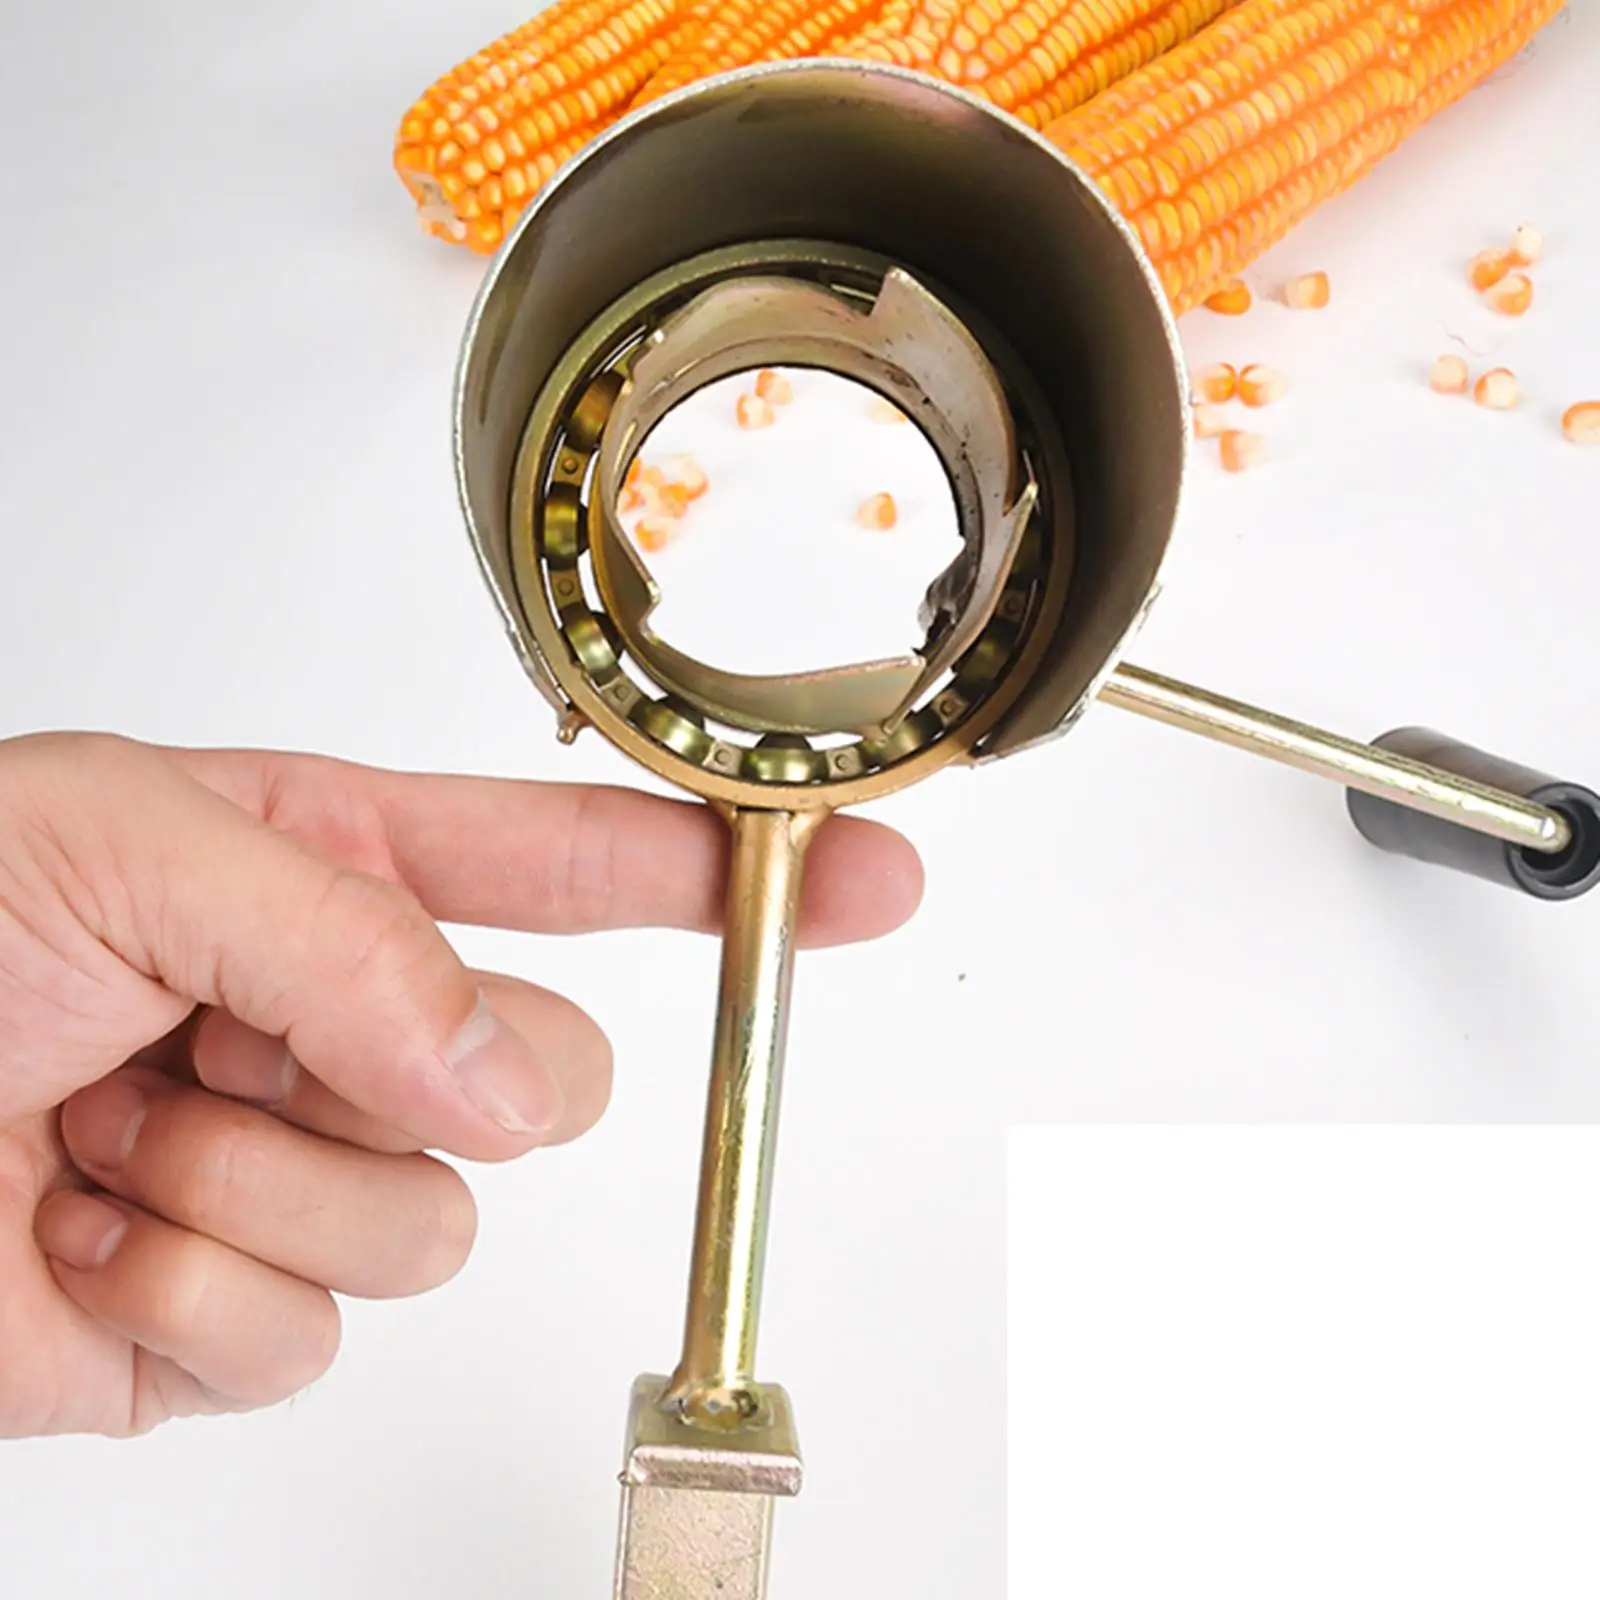 Dial The Stripping Protective Remover Tool Measuring Handle Corn Thresher for Kitchen